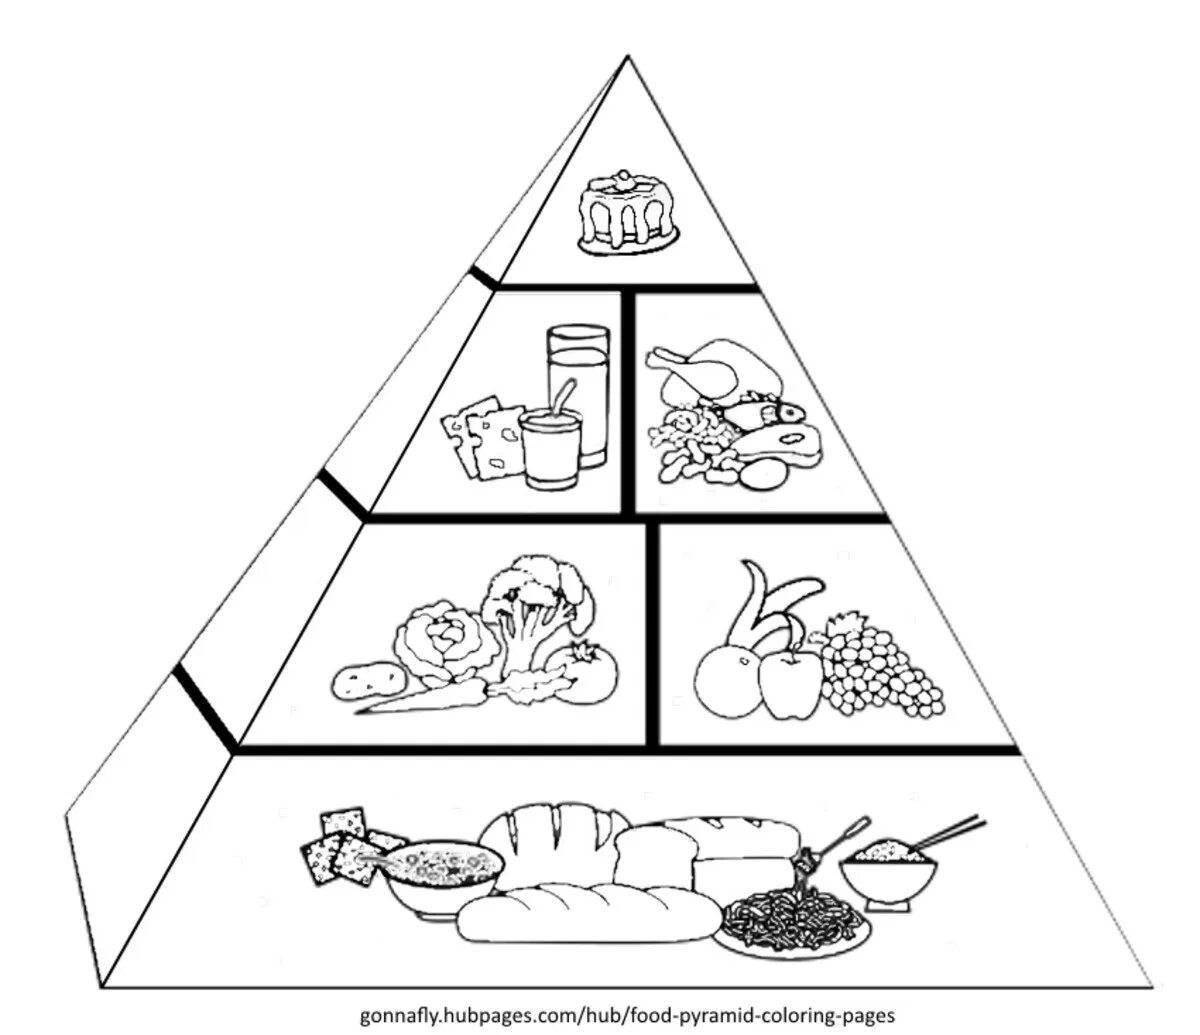 Fun coloring book about proper nutrition